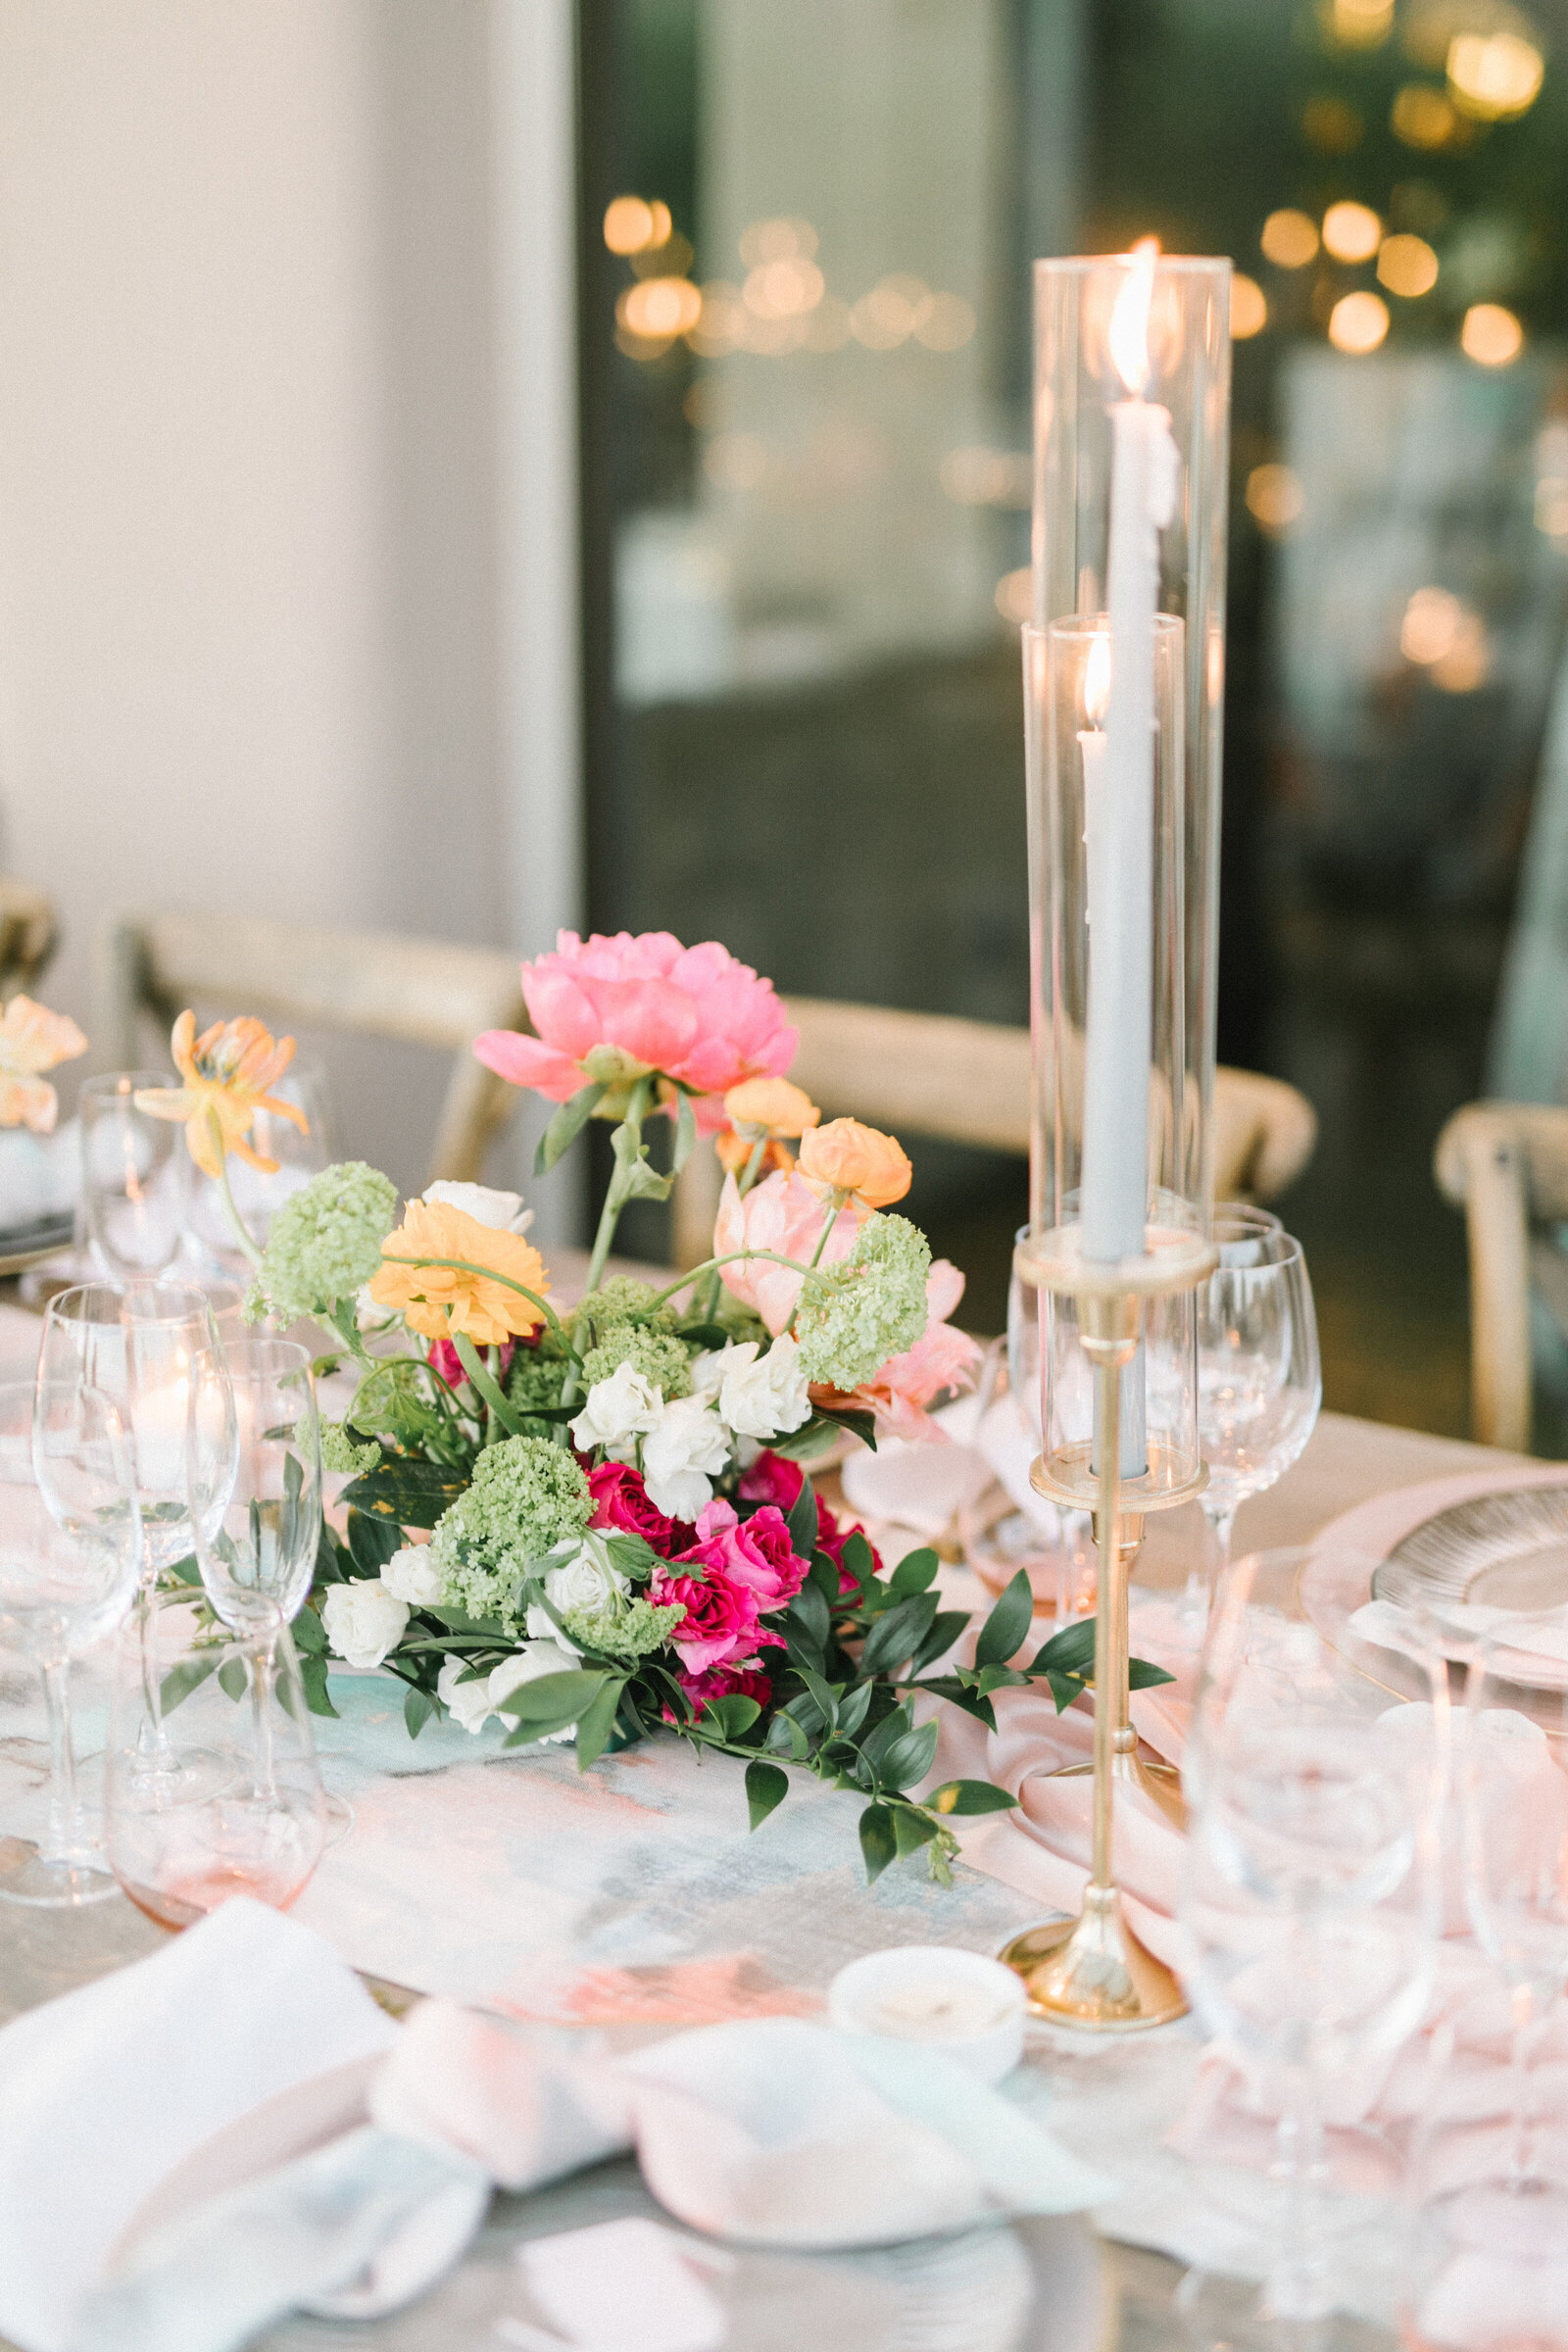 Wedding reception table decorated with colorful flowers and candles.